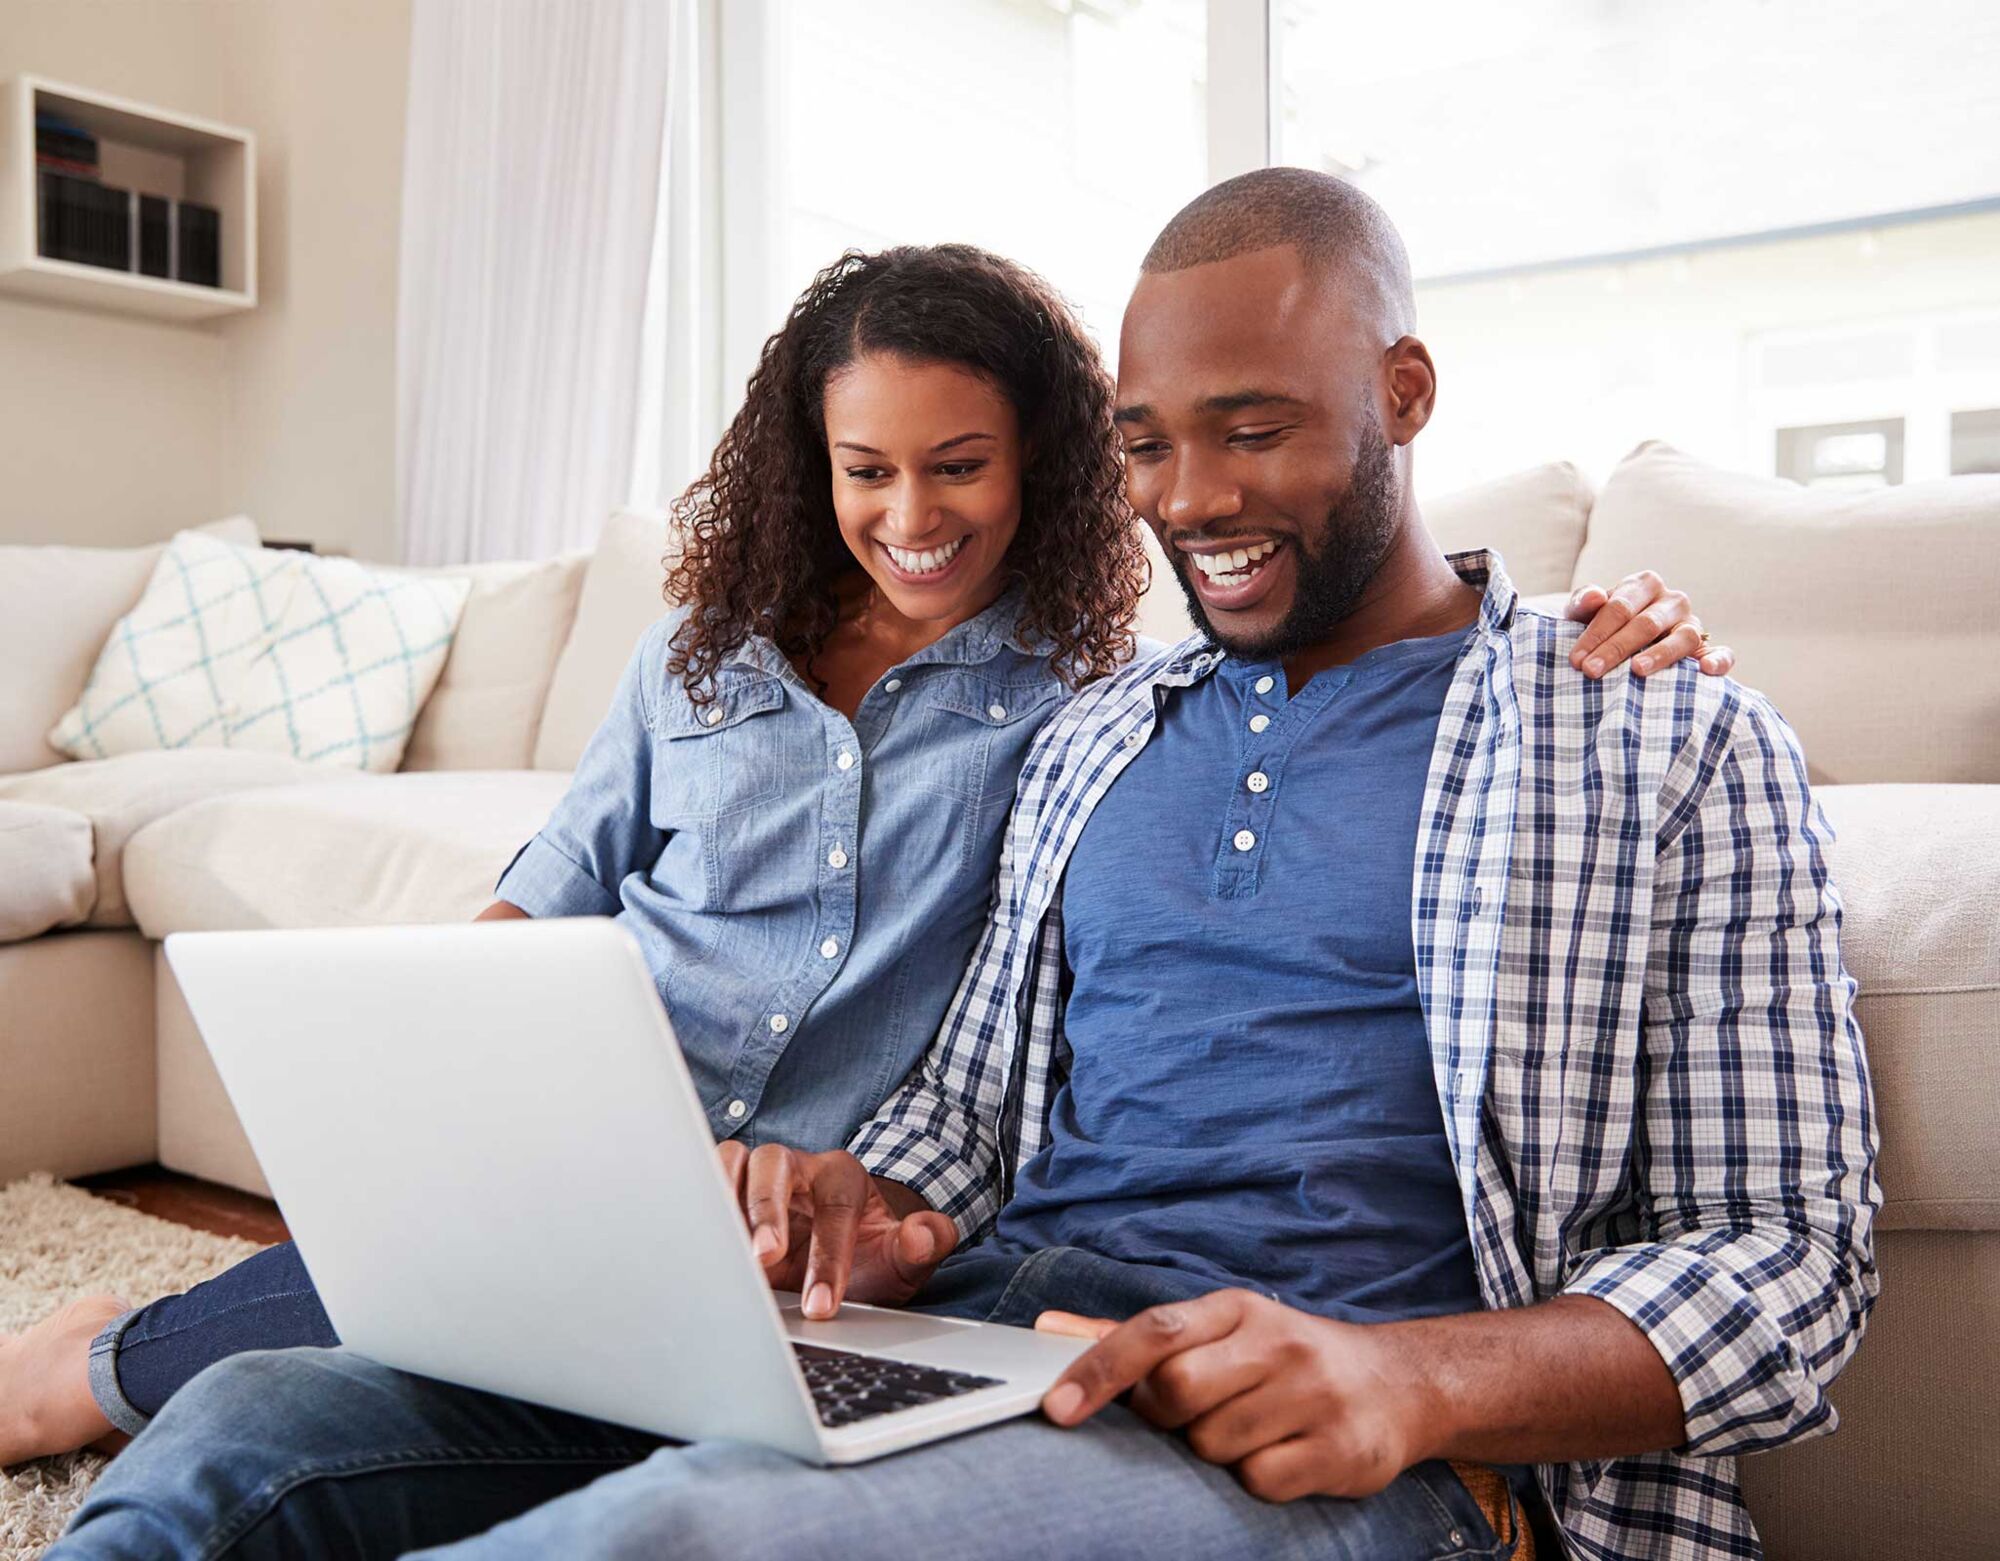 A couple sitting on the floor looking at a laptop and smiling.